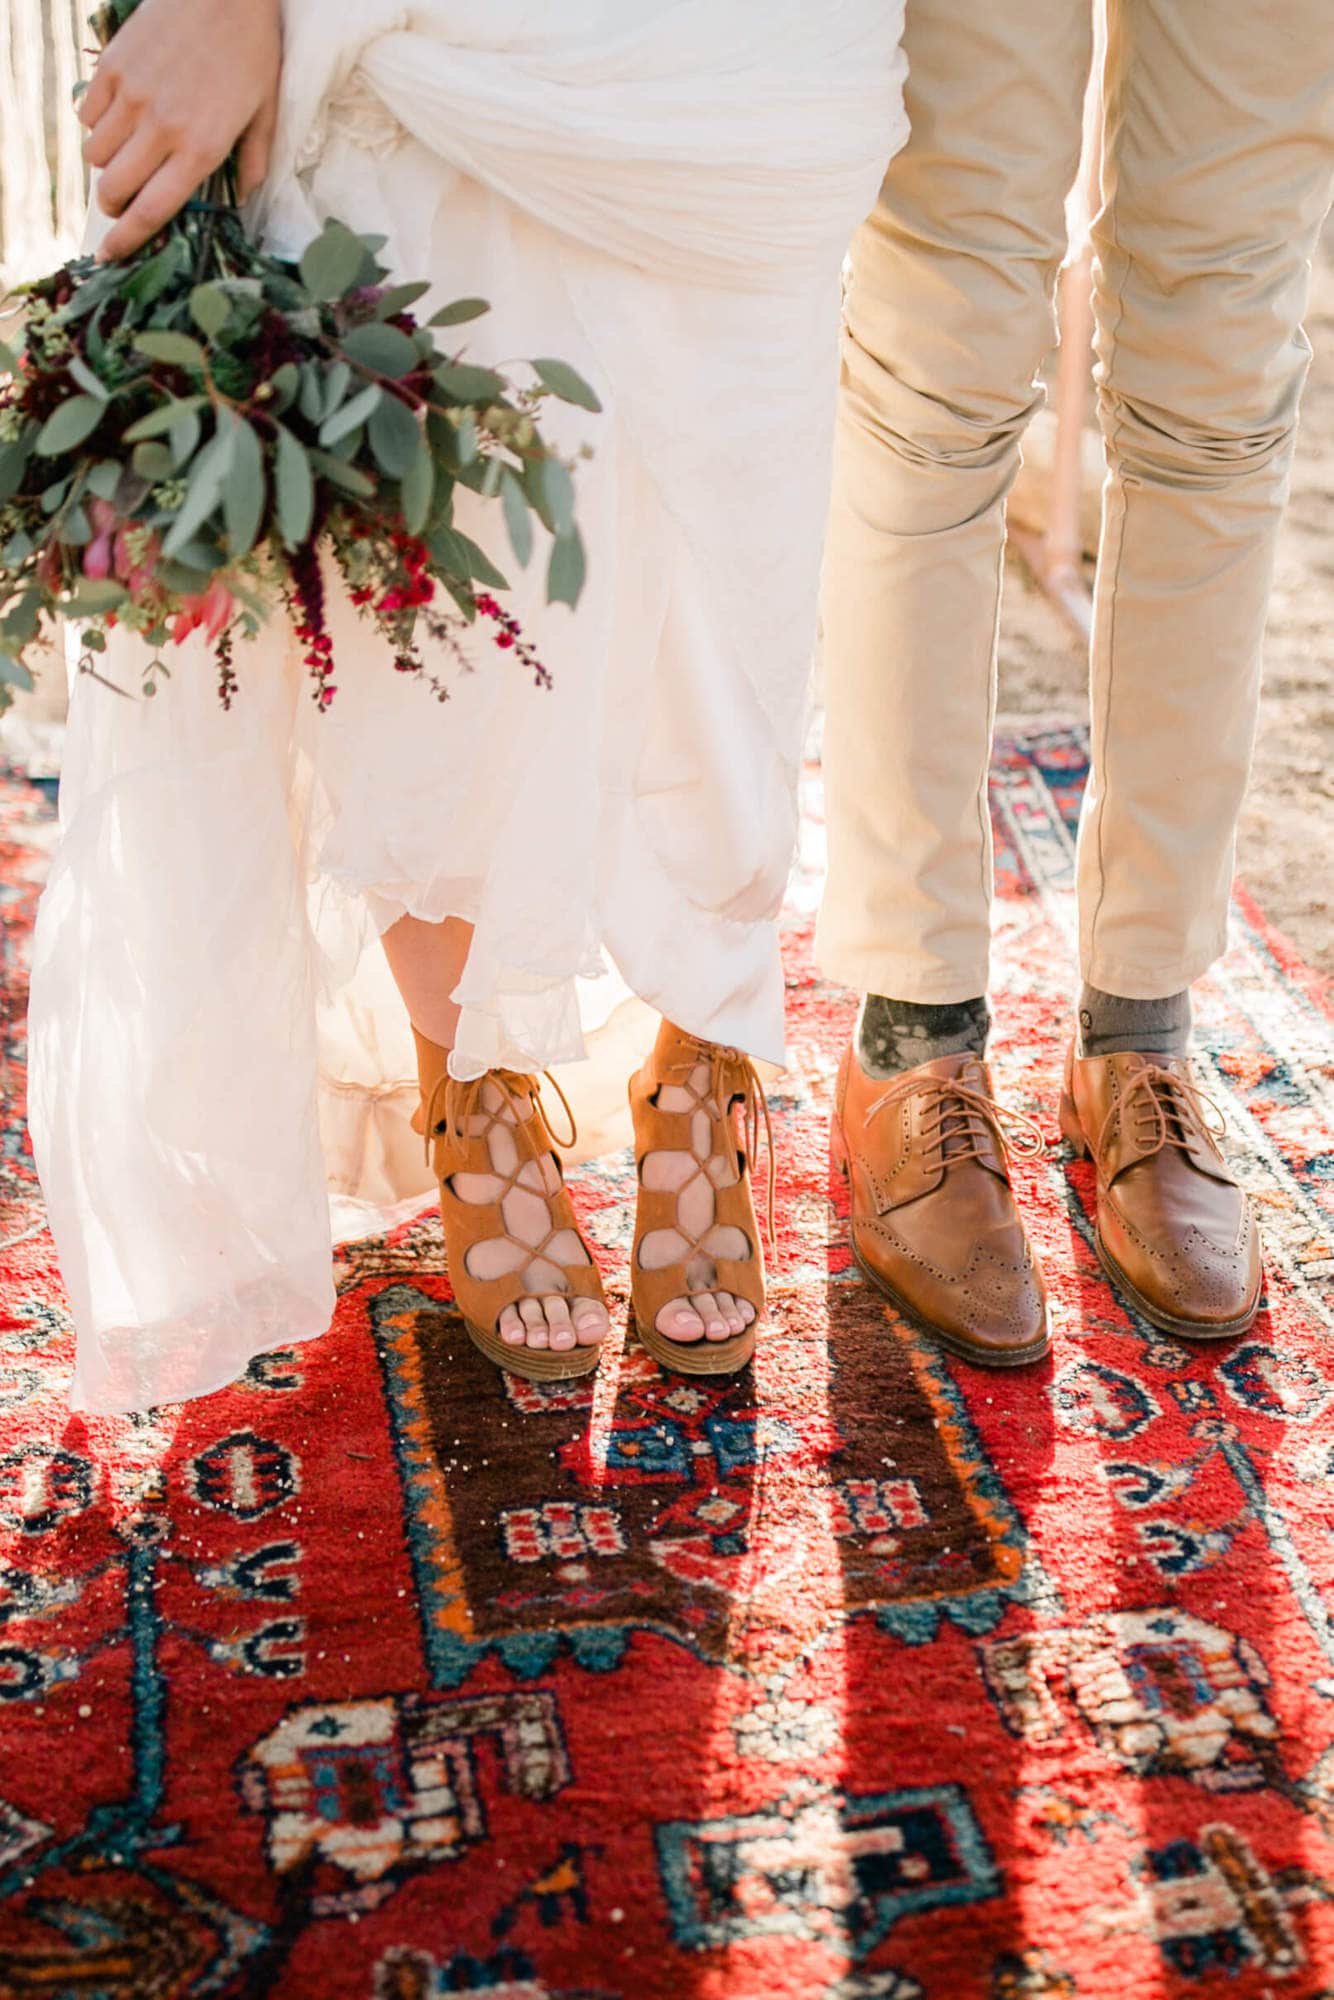 The bride and groom stand on a brightly patterned rug at their Joshua tree wedding.